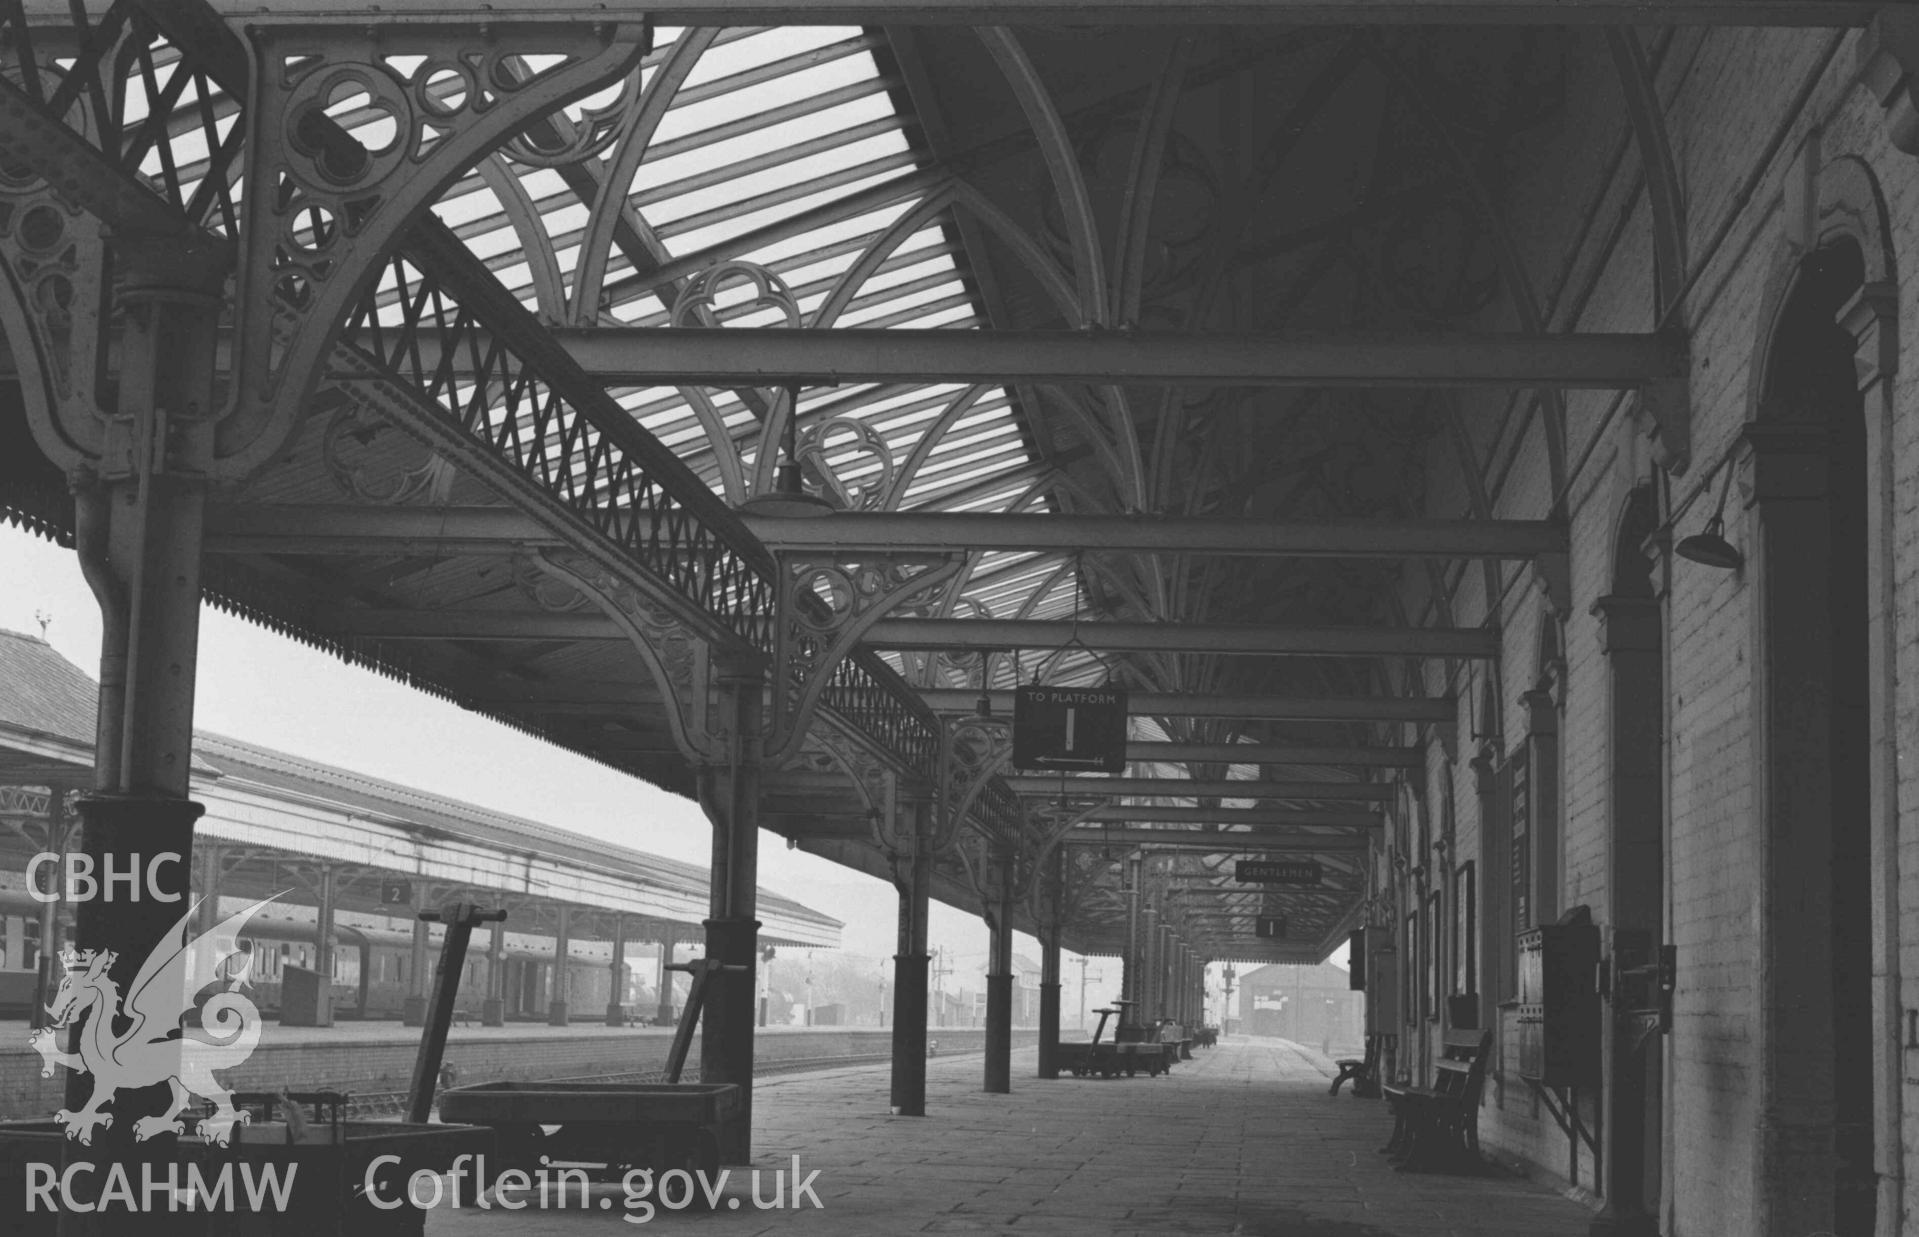 Digital copy of a black and white negative showing iron roof gurders above Platform 1 at Abersytwyth Railway Station. Photographed by Arthur Chater on 3 January 1969. Looking south east from Grid Reference SN 5852 8157.